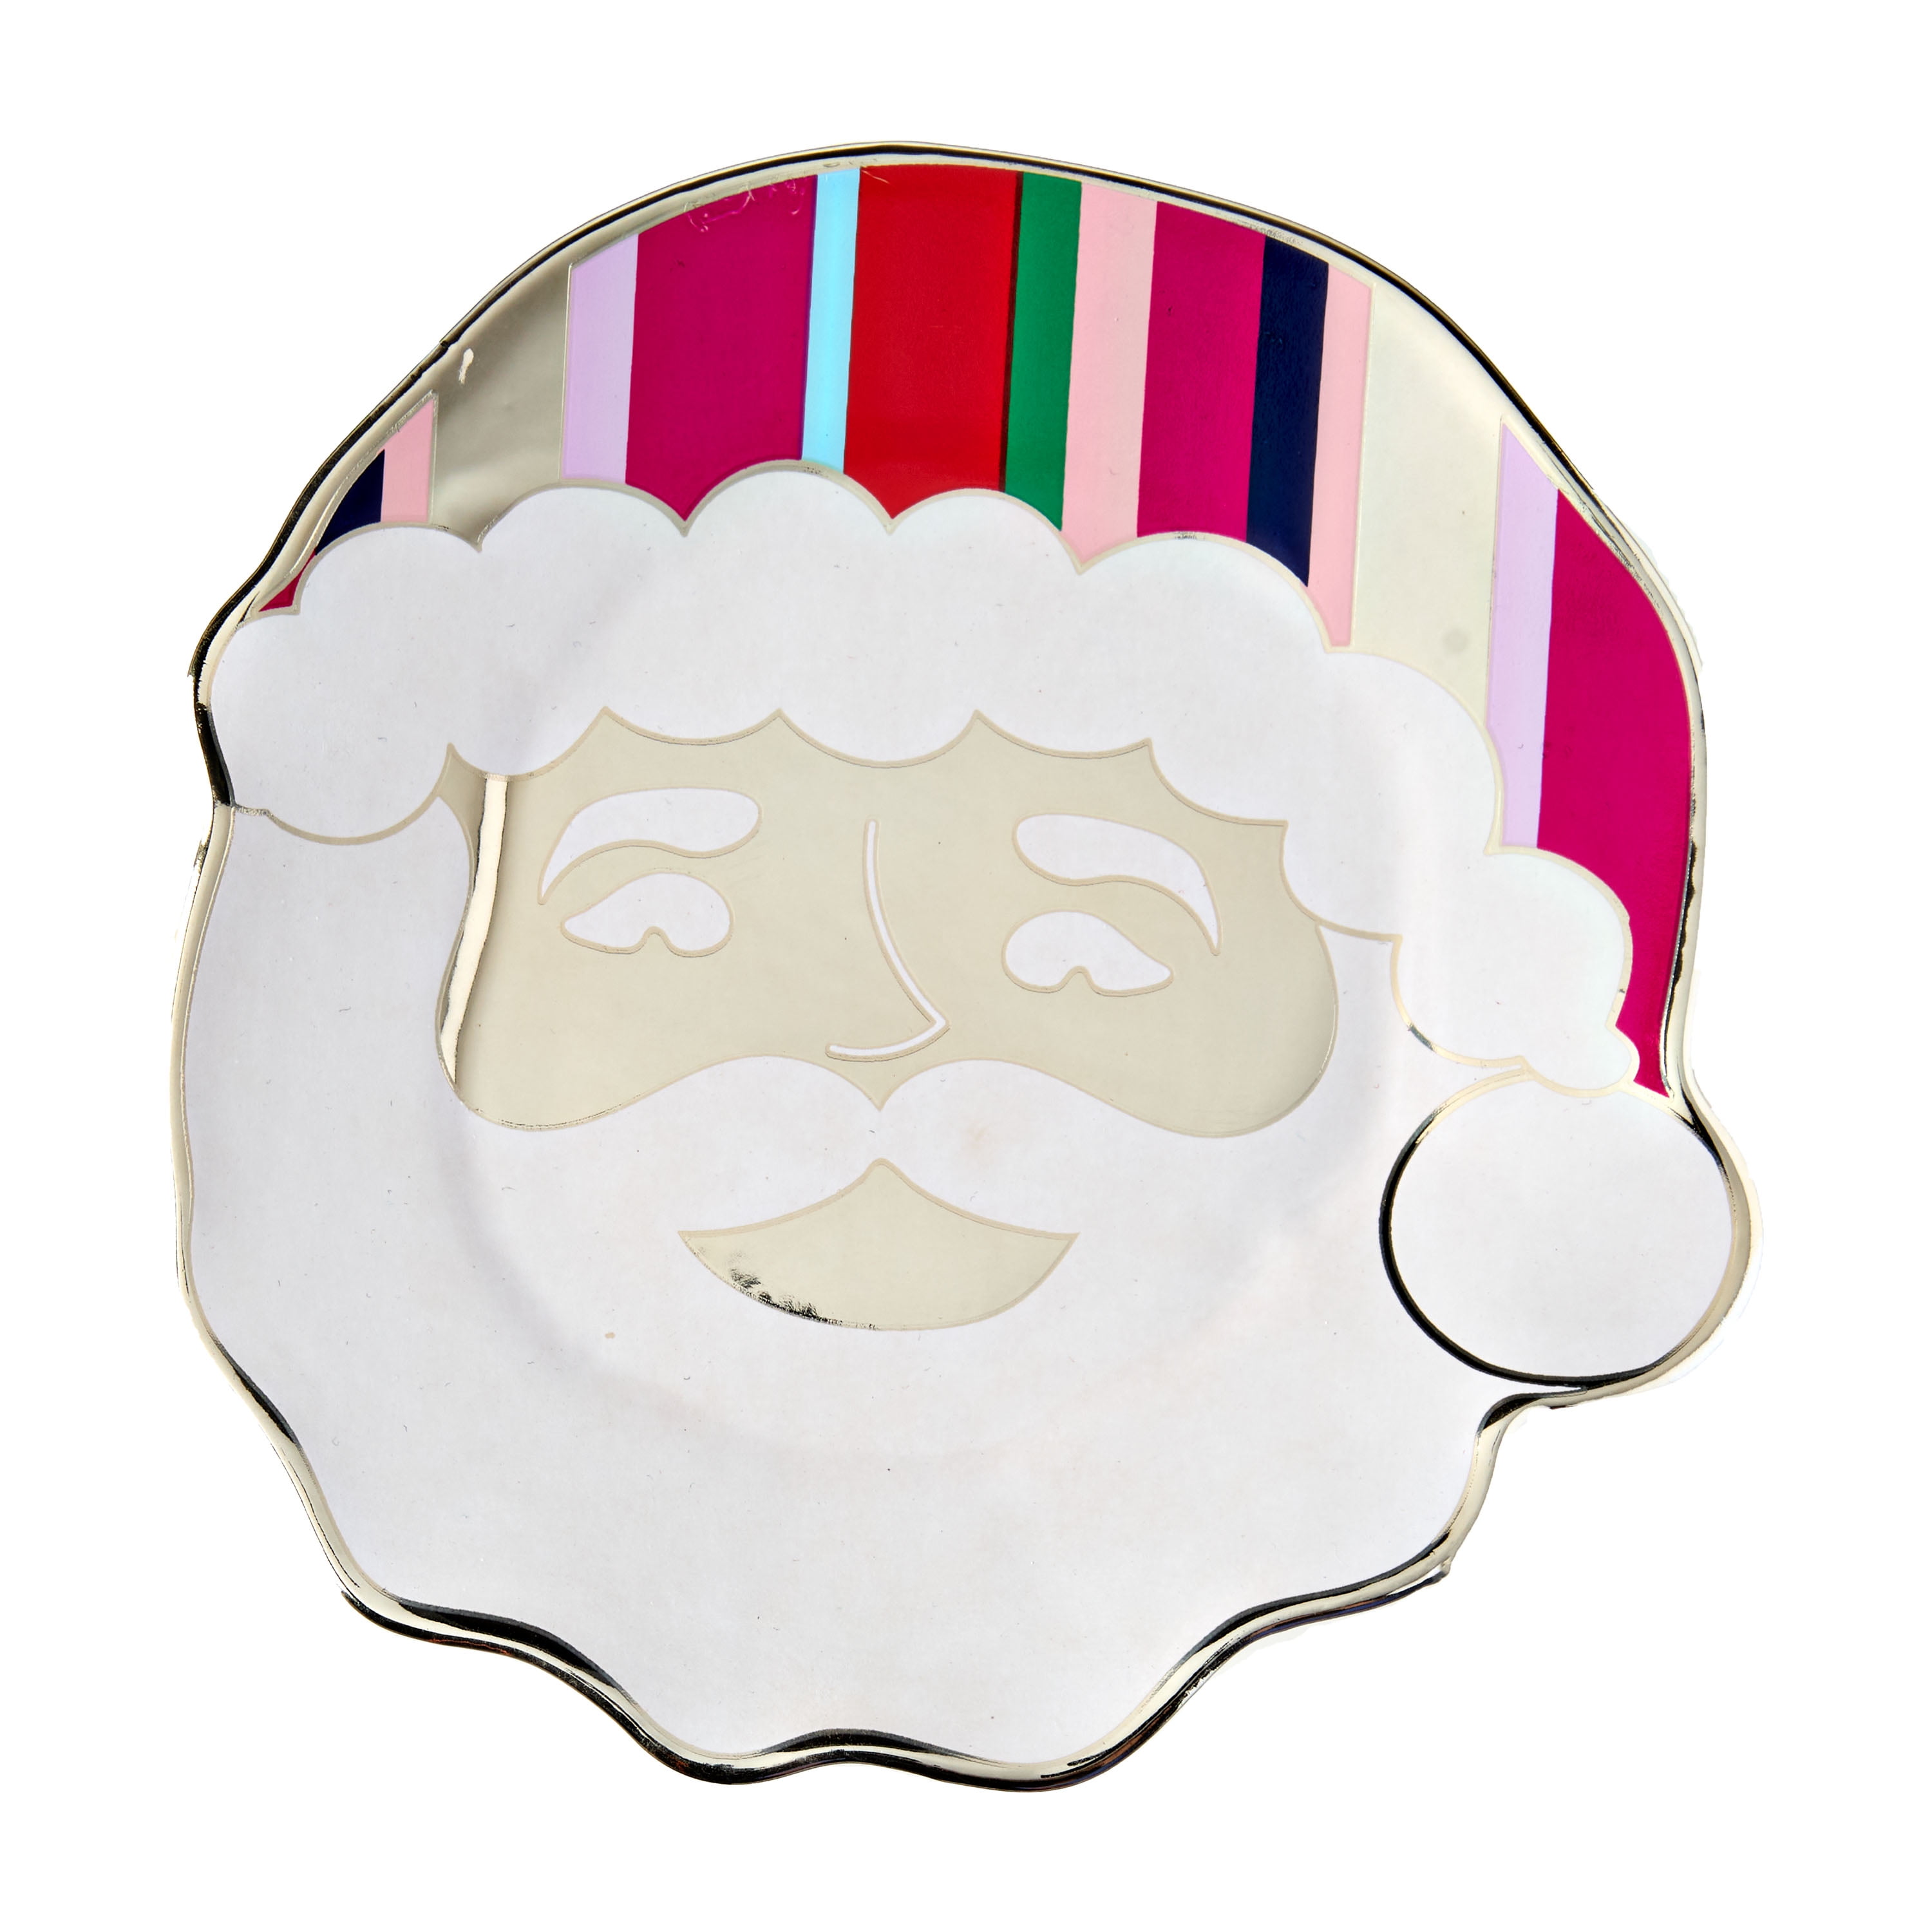 SANTA CLAUS TRINKET BOX FOR SMALL GIFTS LIKE JEWELRY POLY RESIN 